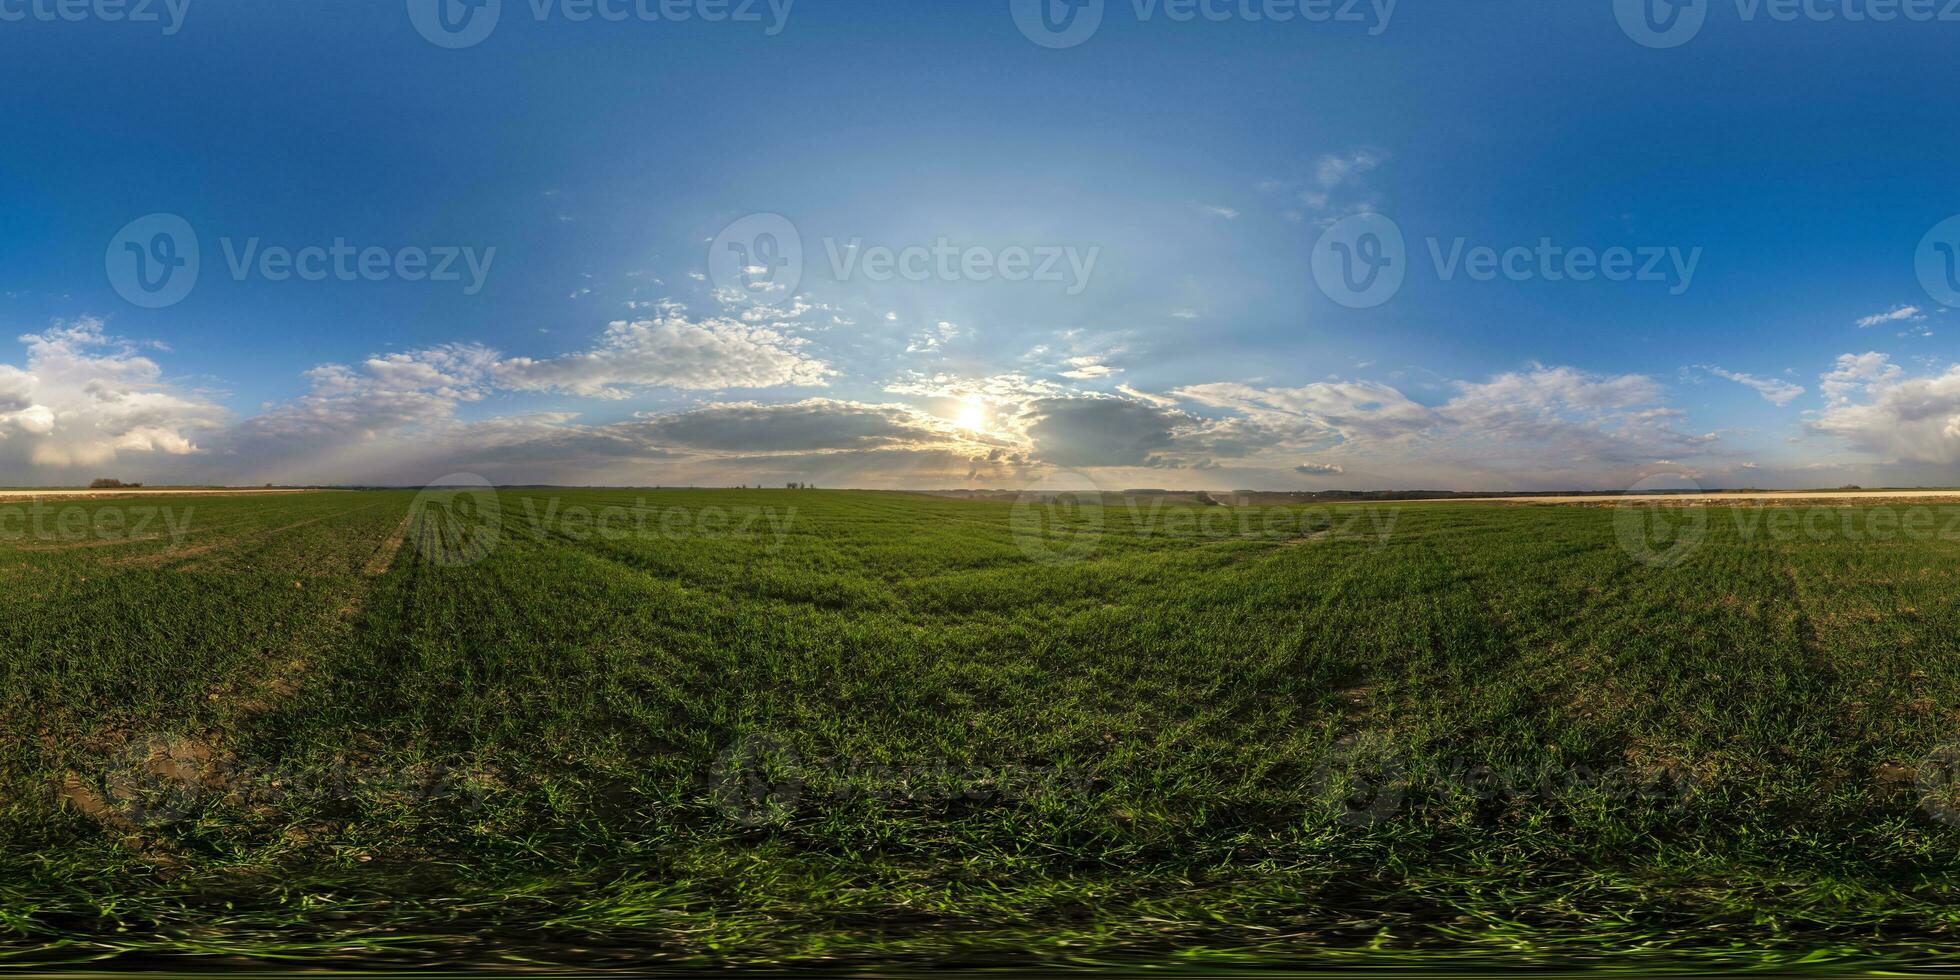 360 hdri panorama view among fields with sunset sky in golden hour in countryside with tractor tires in equirectangular seamless spherical projection.  use like sky replacement for drone shots photo